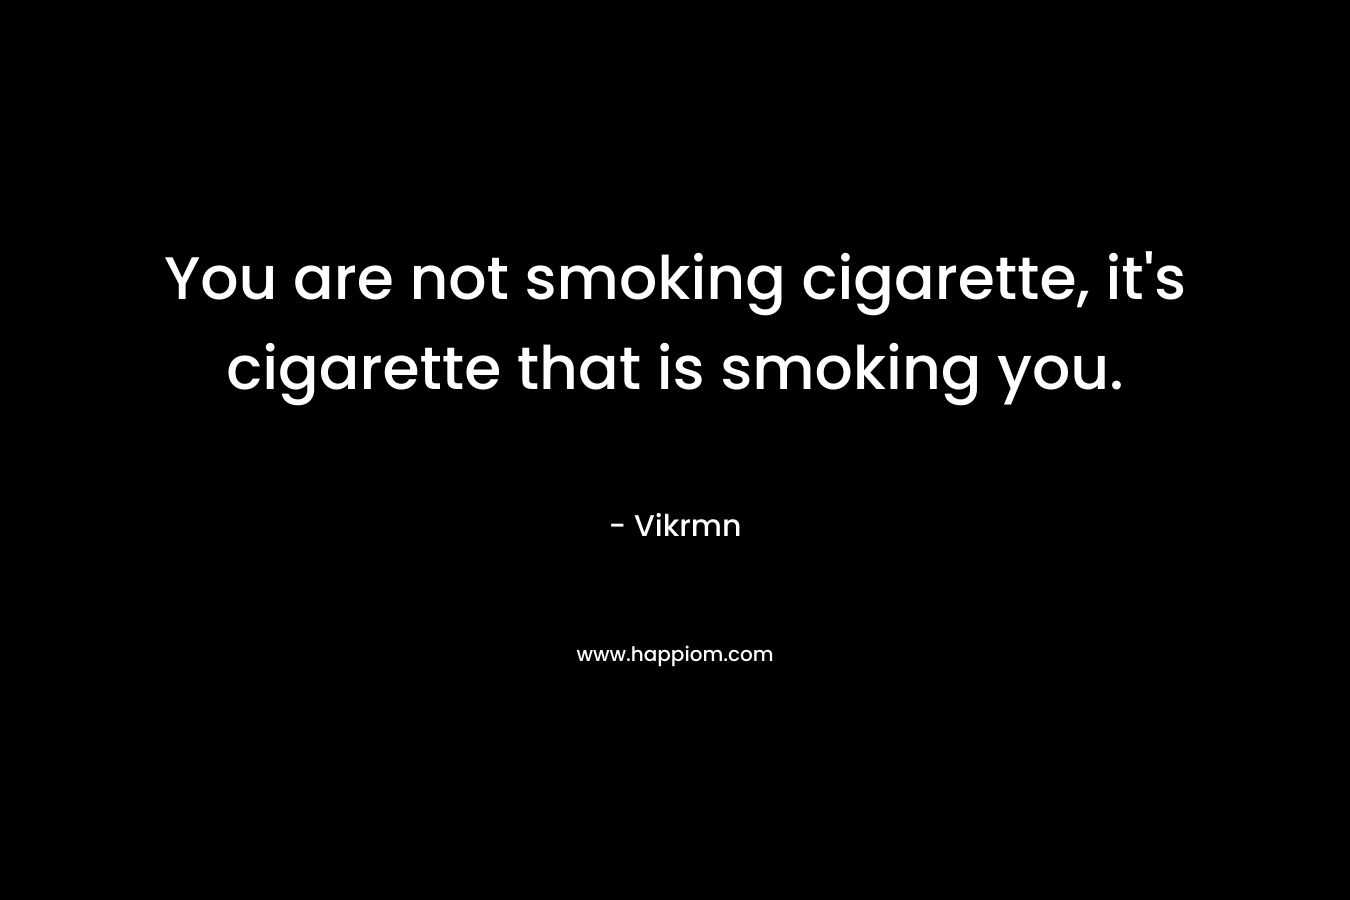 You are not smoking cigarette, it's cigarette that is smoking you.